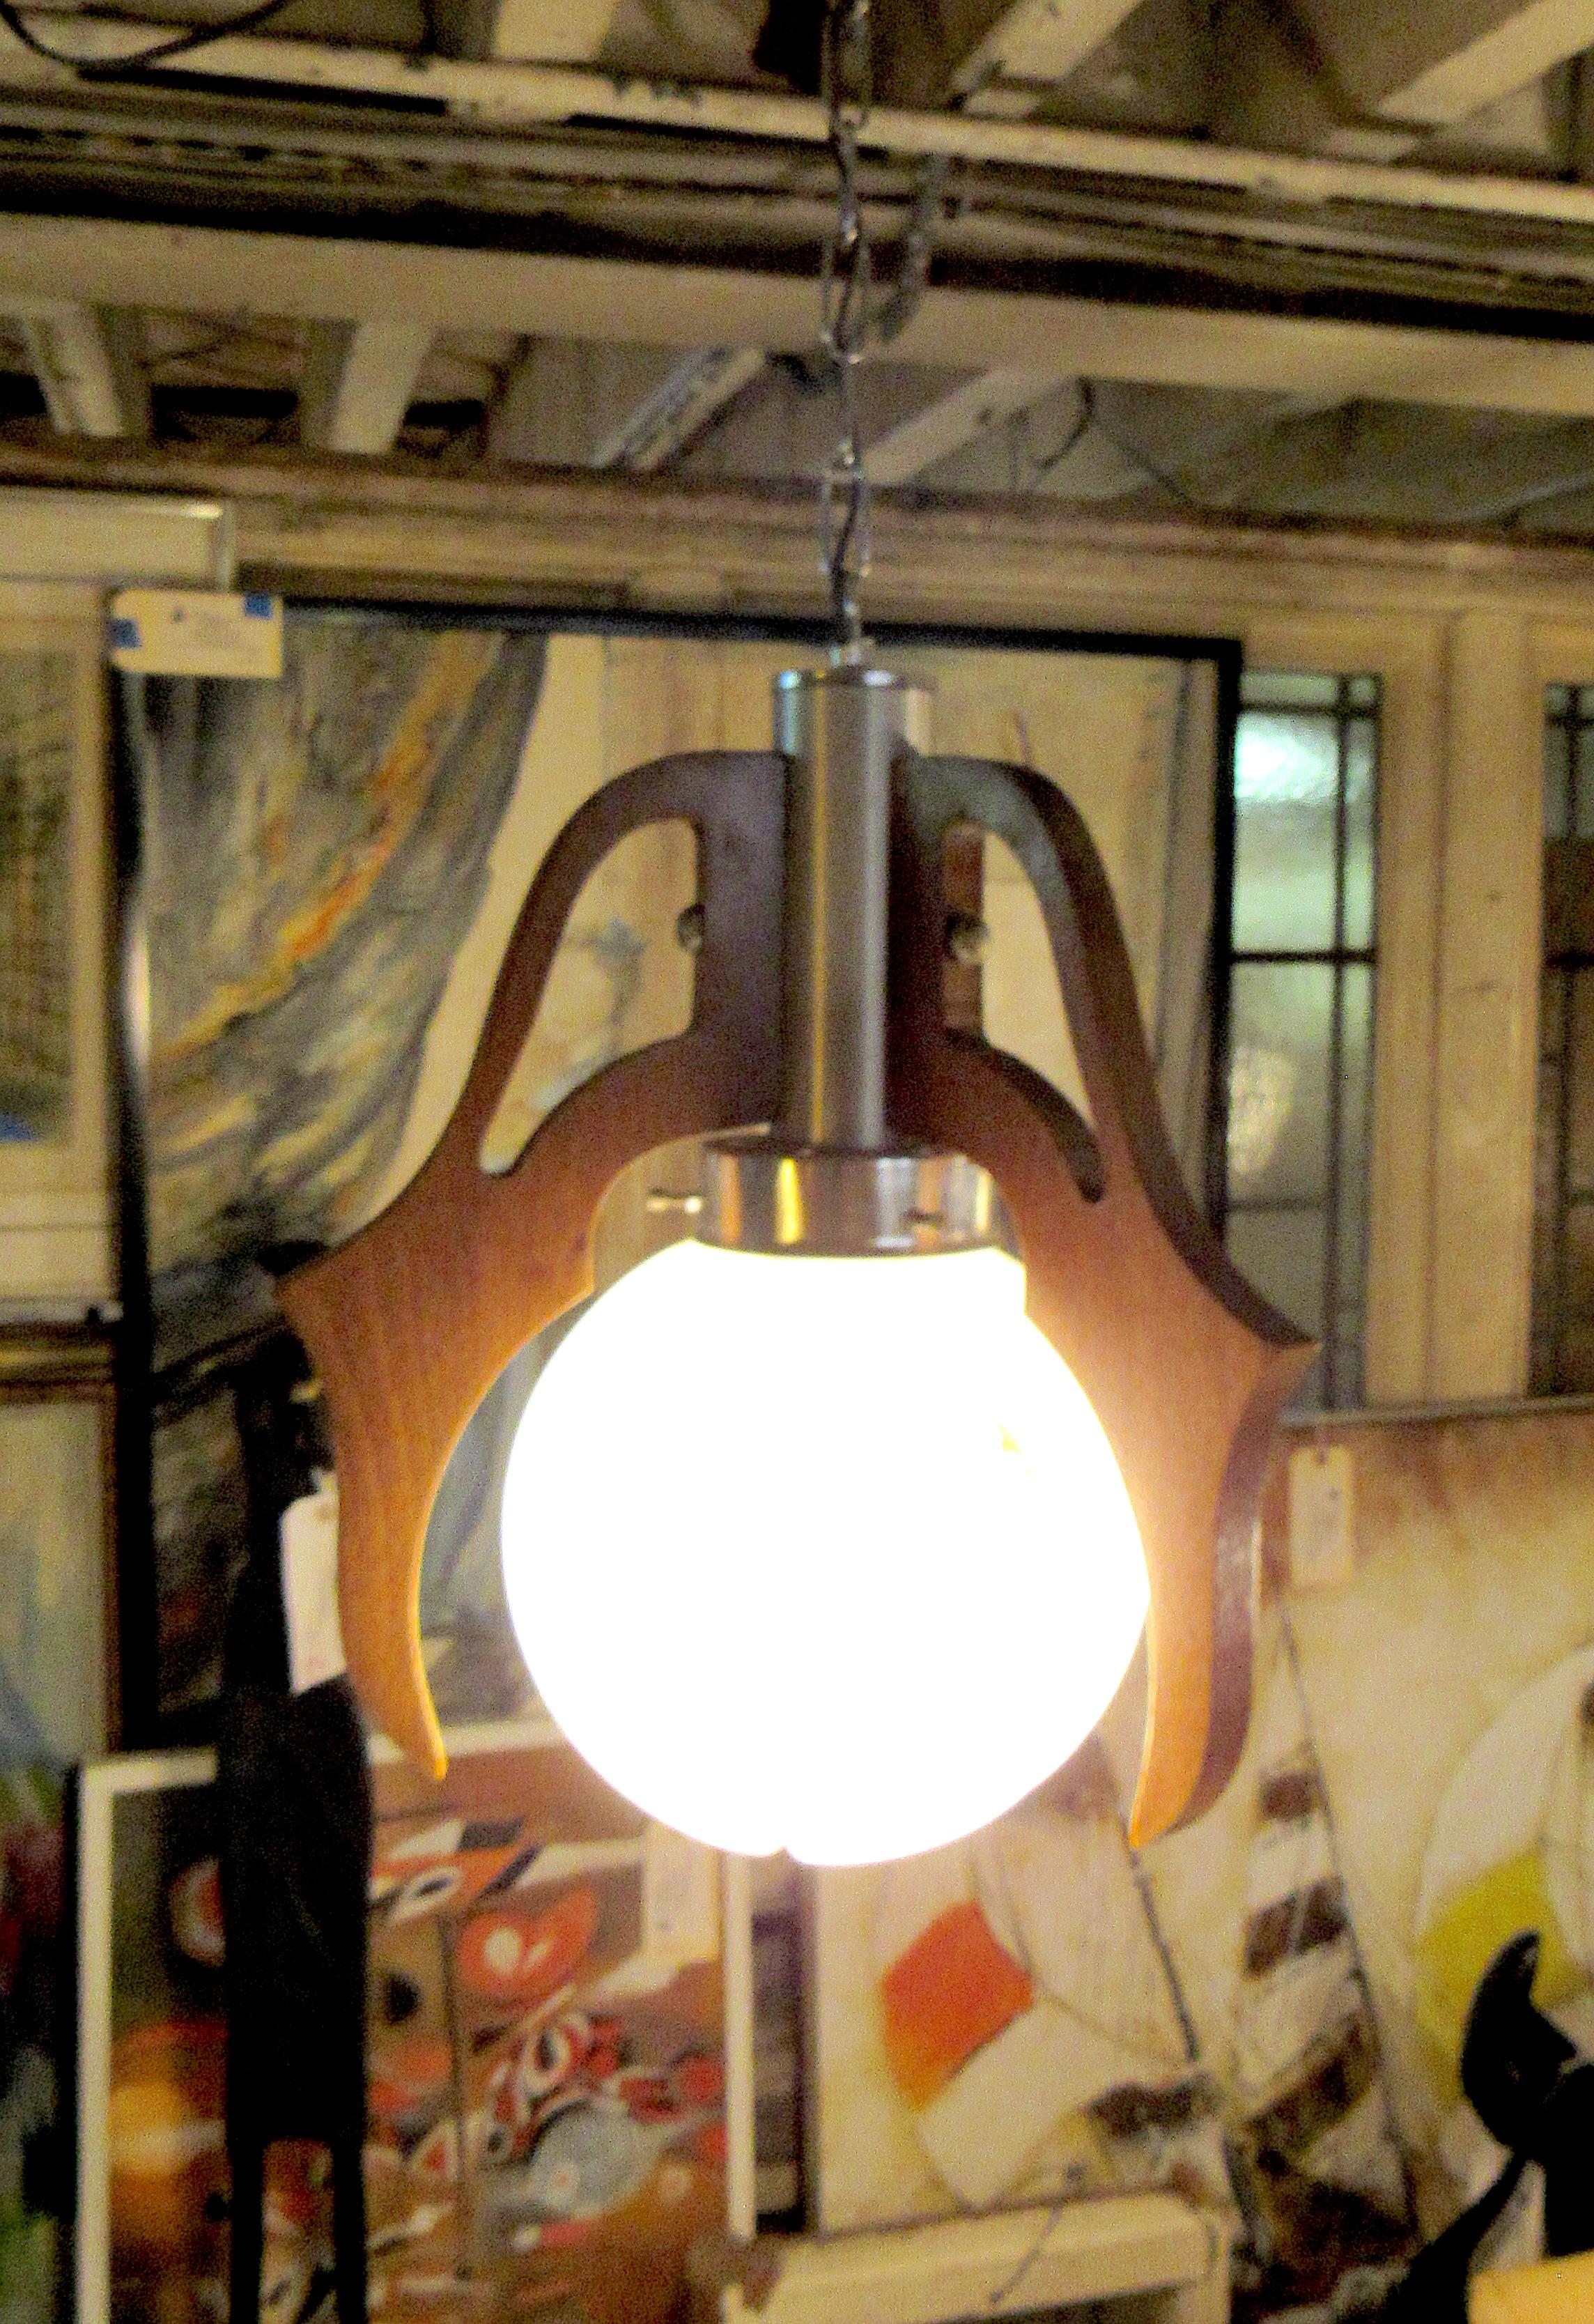 Mid-Century Modern hanging pendant lamp. 3 panels of wood forming a claw shape enclosing a spherical bulb. An undeniably unique look. Would look great in a room accompanied by other wood furniture. 

Please confirm location NY or NJ.